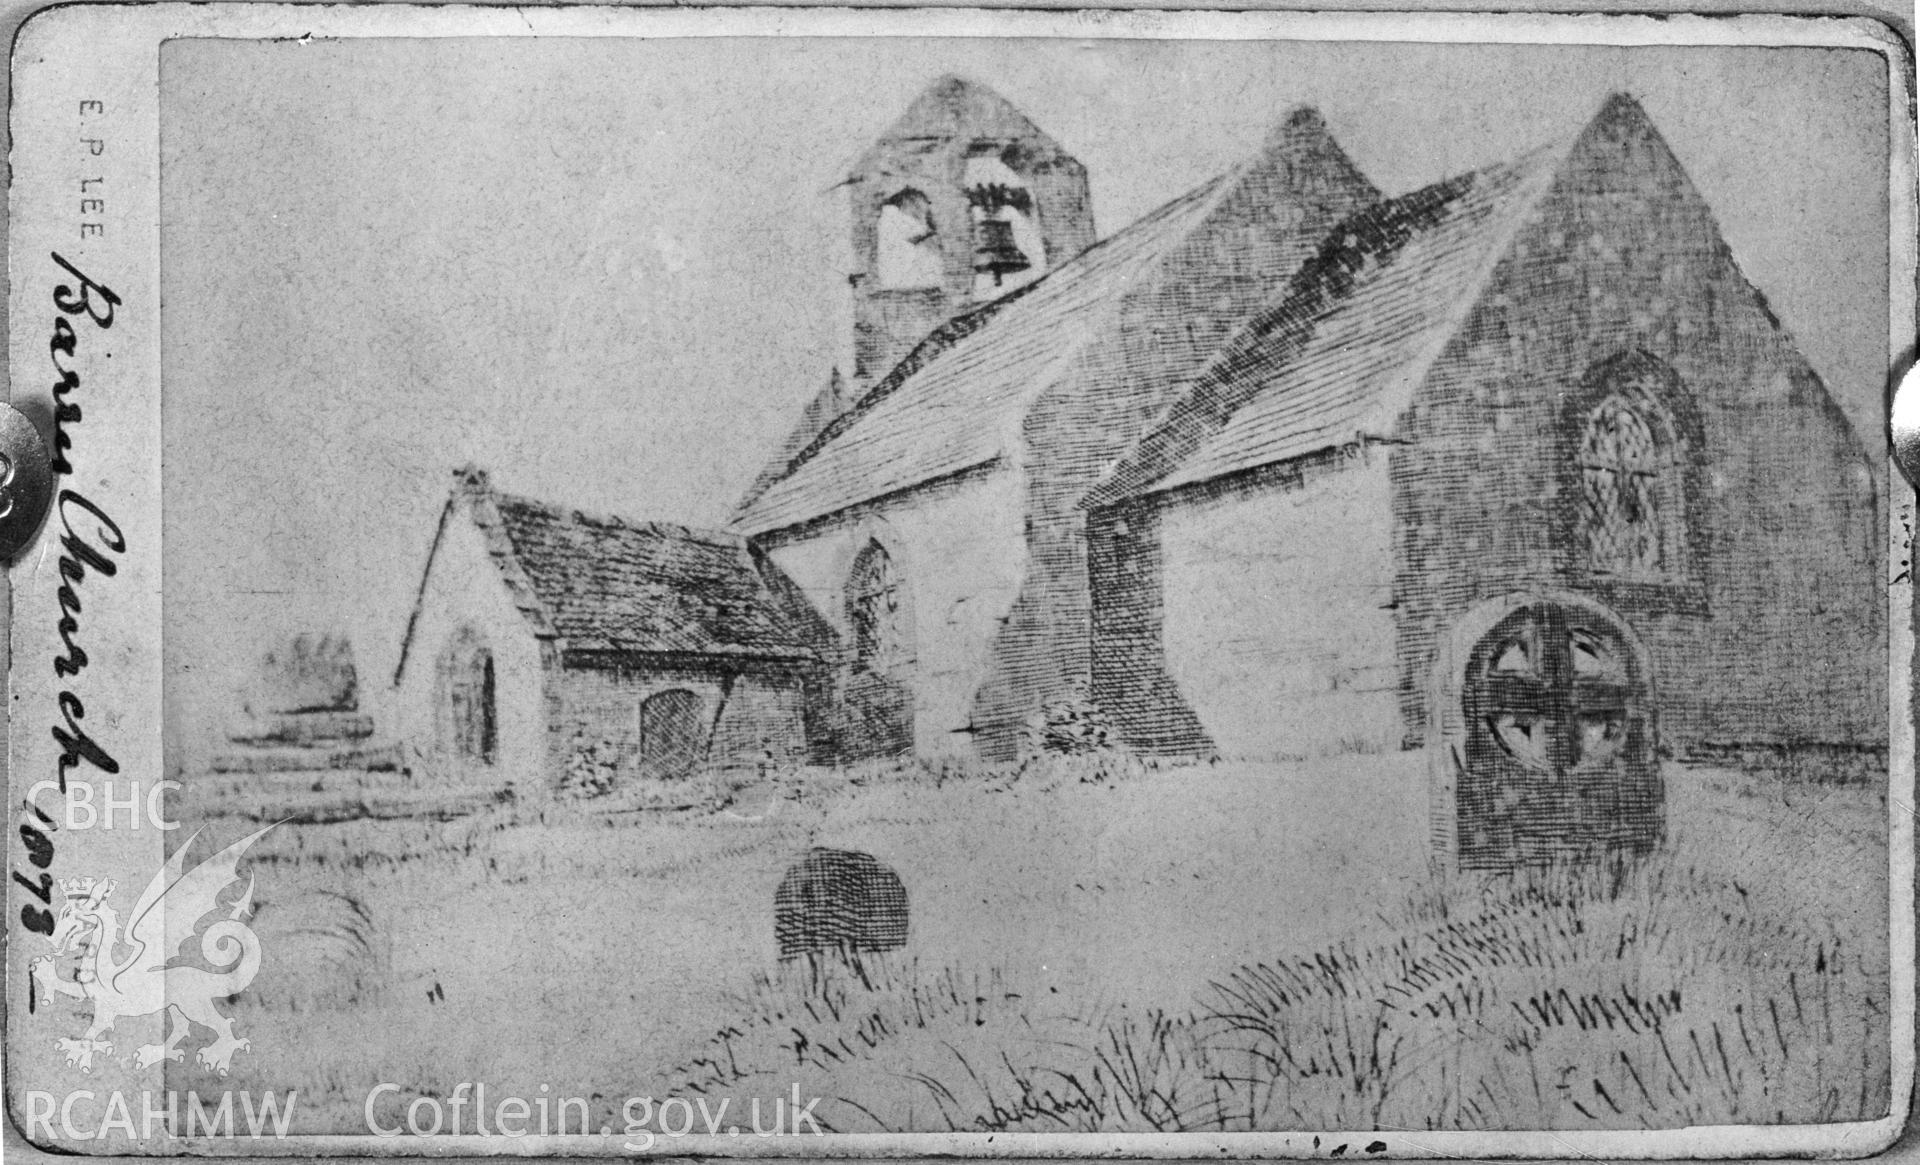 Black and white acetate negative showing view of Barry Church.